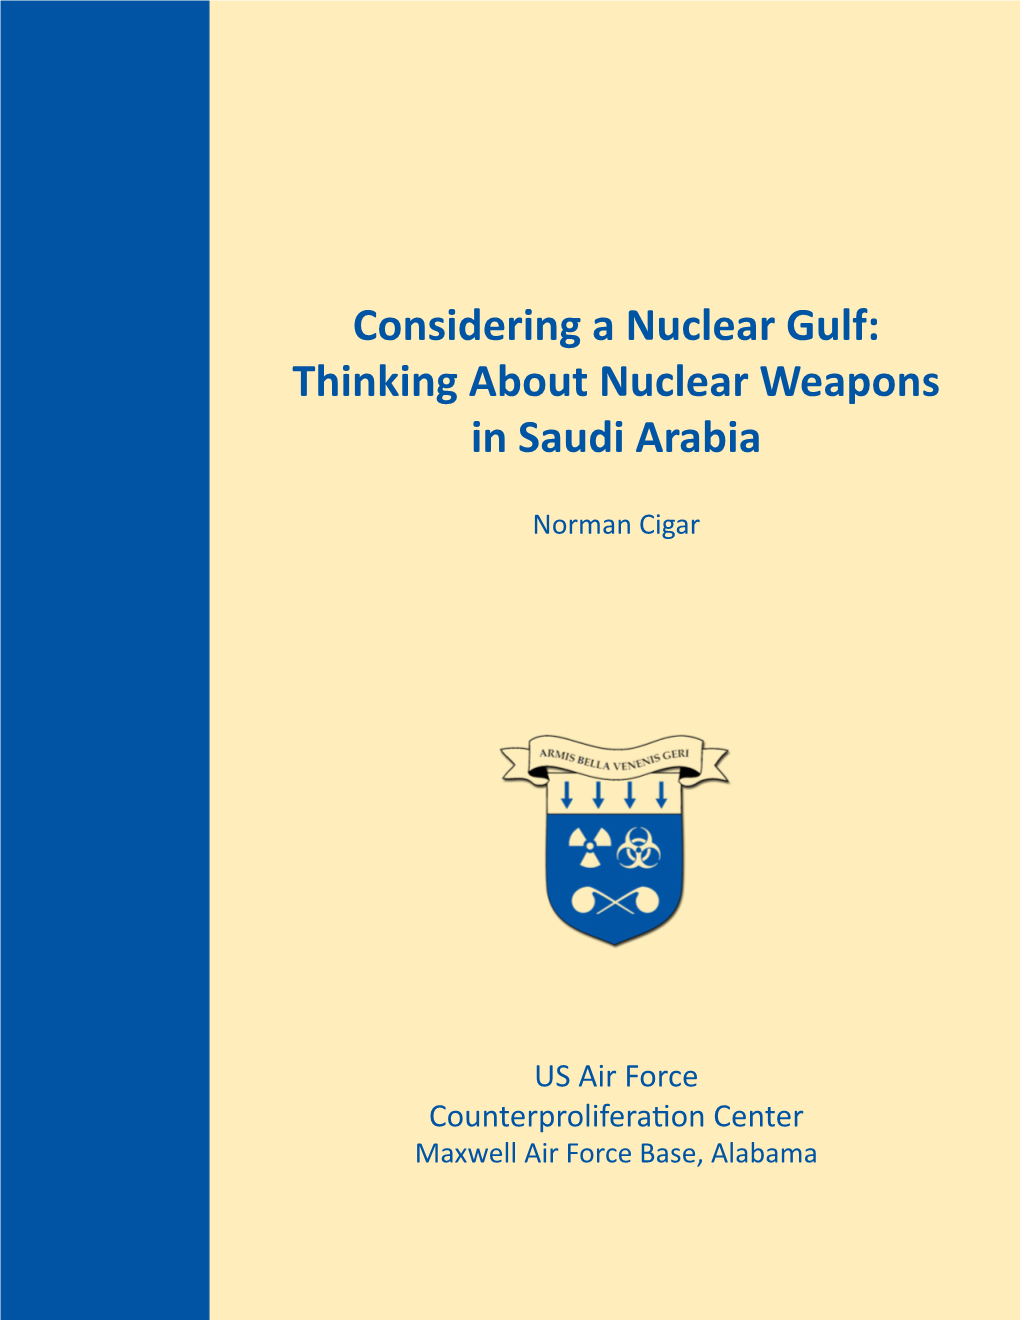 Considering a Nuclear Gulf: Thinking About Nuclear Weapons in Saudi Arabia